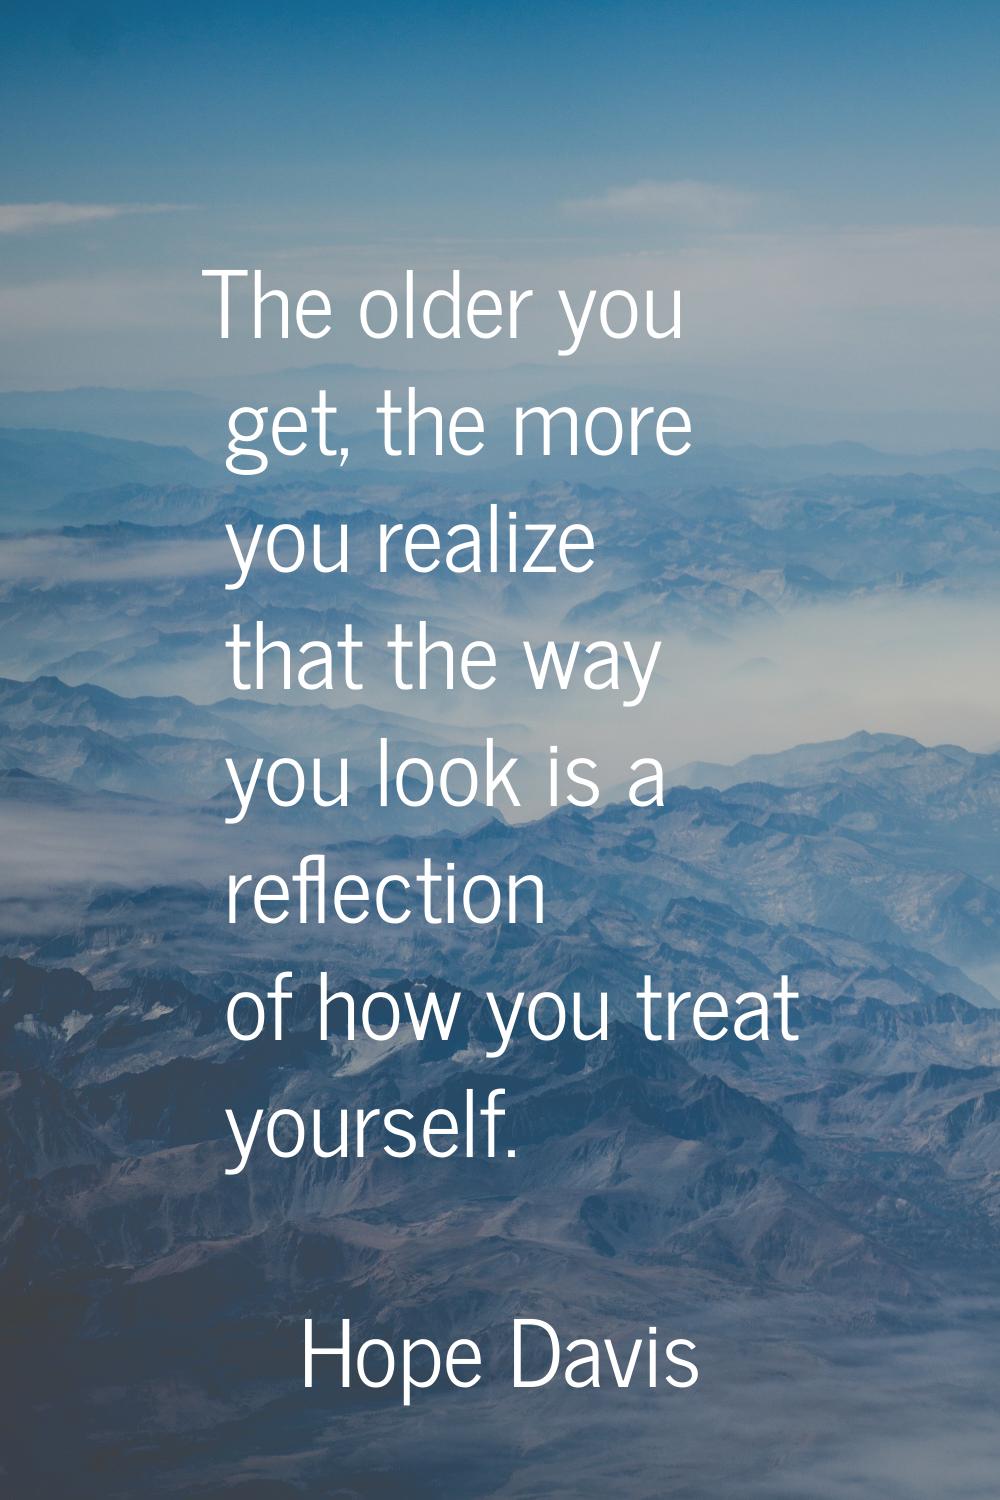 The older you get, the more you realize that the way you look is a reflection of how you treat your